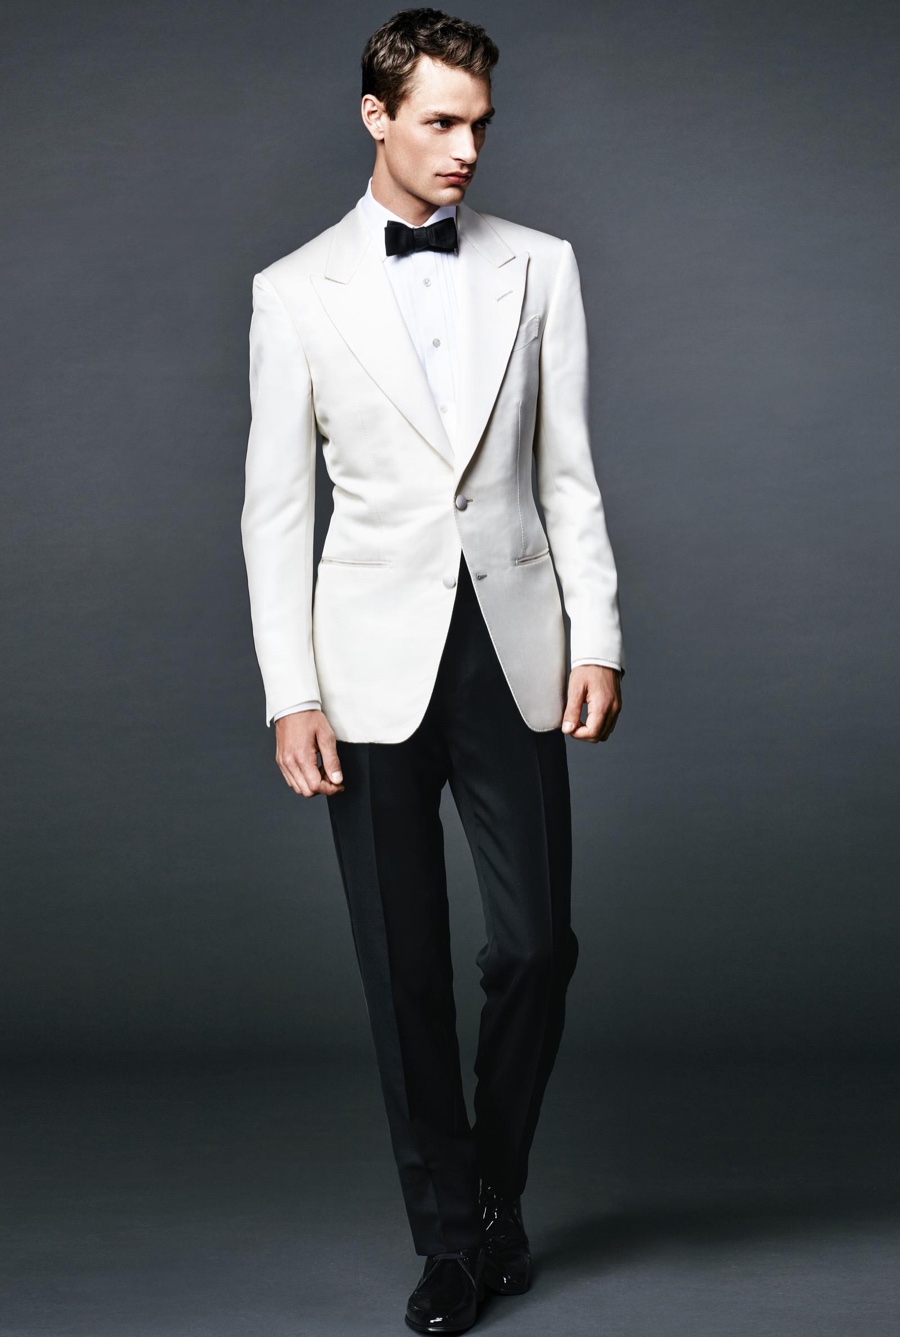 Tom Ford Unveils James Bond Capsule Collection